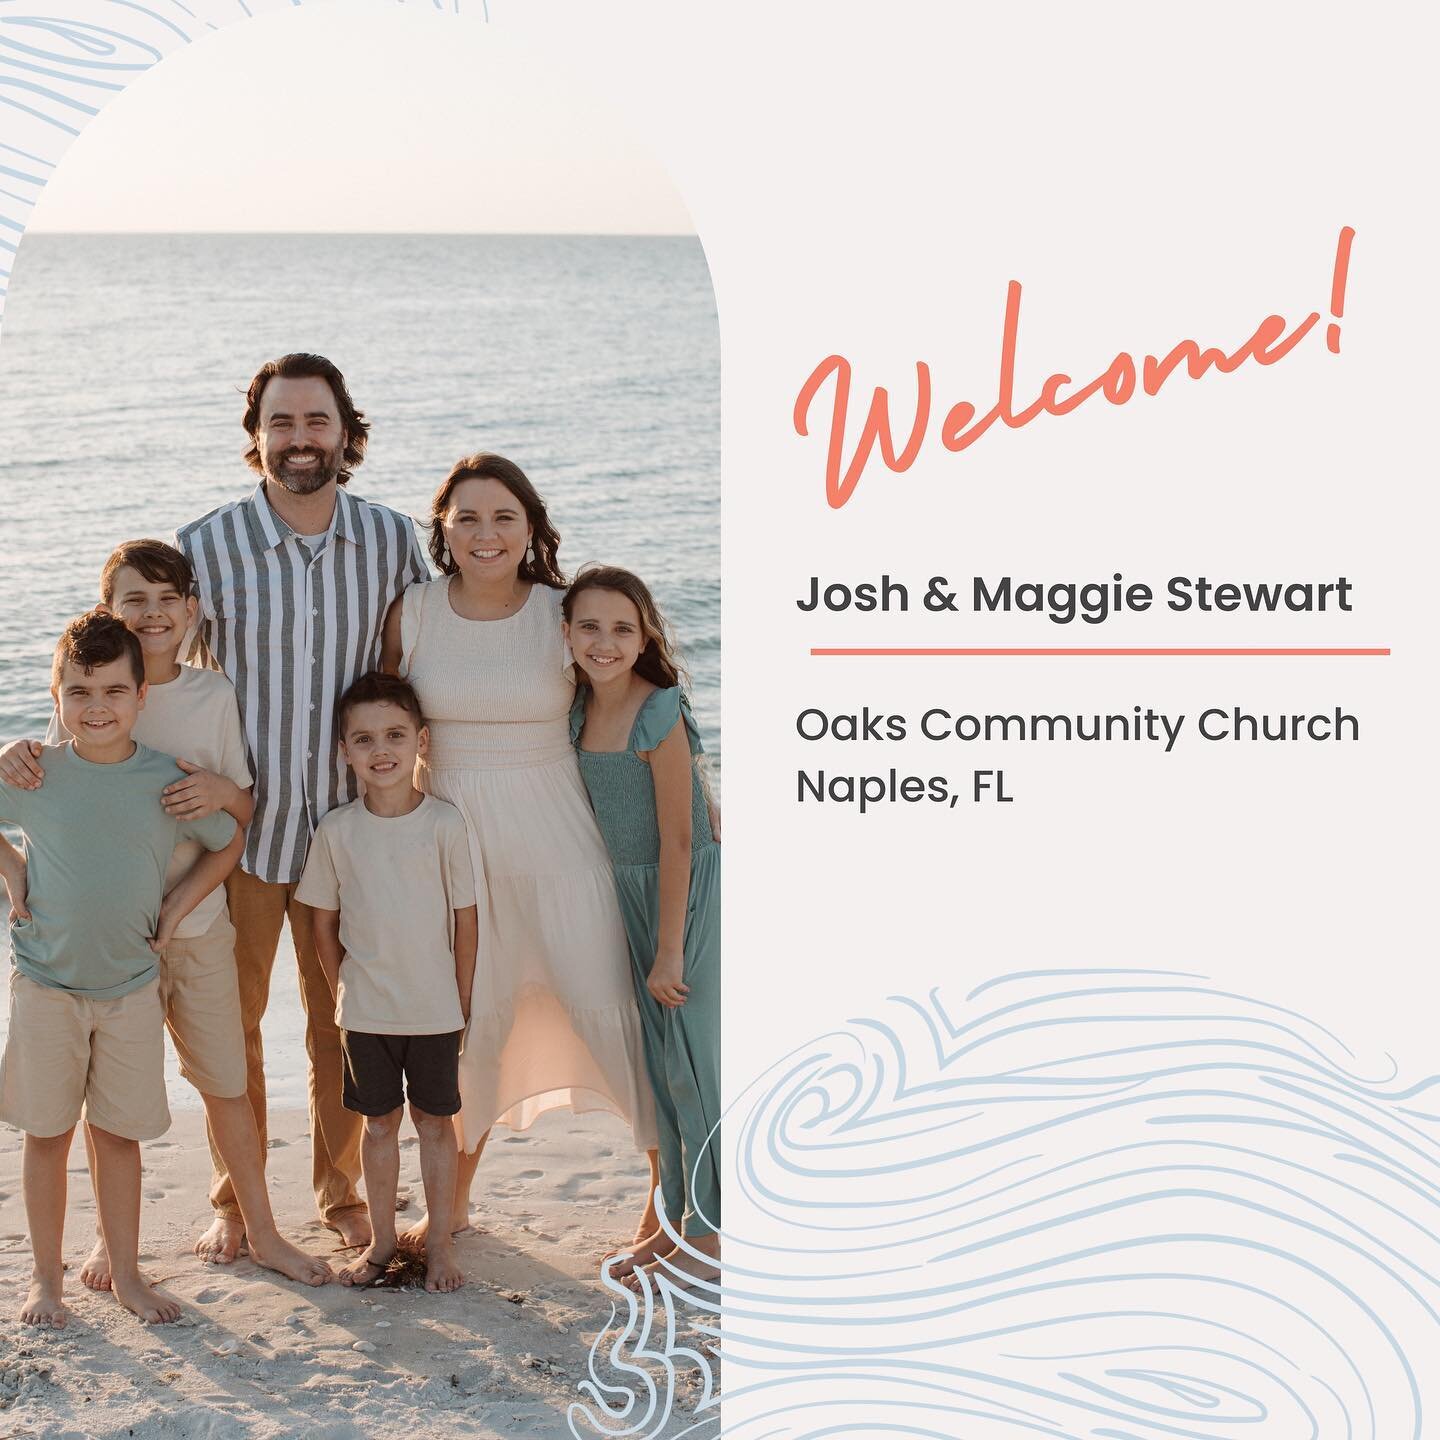 Please give a warm welcome to Josh &amp; Maggie Stewart and Oaks Community Church! 

&ldquo;Oaks Community Church is a church plant in northeast Naples, Florida. Throughout the history of Collier County, northeast Naples has been underdeveloped and s